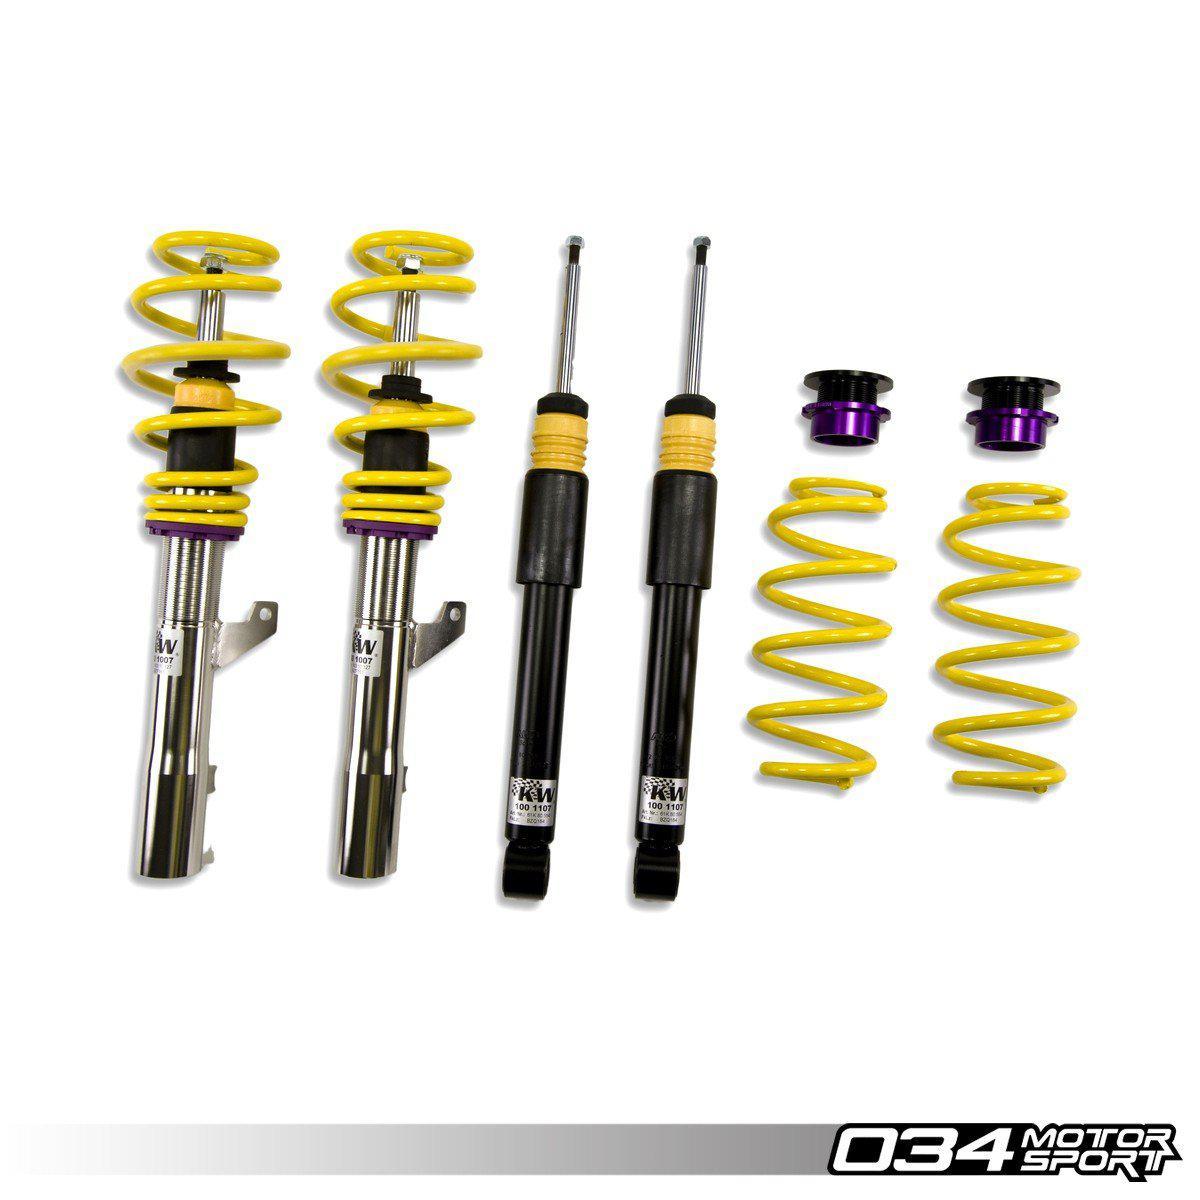 KW Variant 1 Coilover Suspension, 8p Audi A3 Quattro &amp; B6/B7 Volkswagen Passat With Edc-A Little Tuning Co